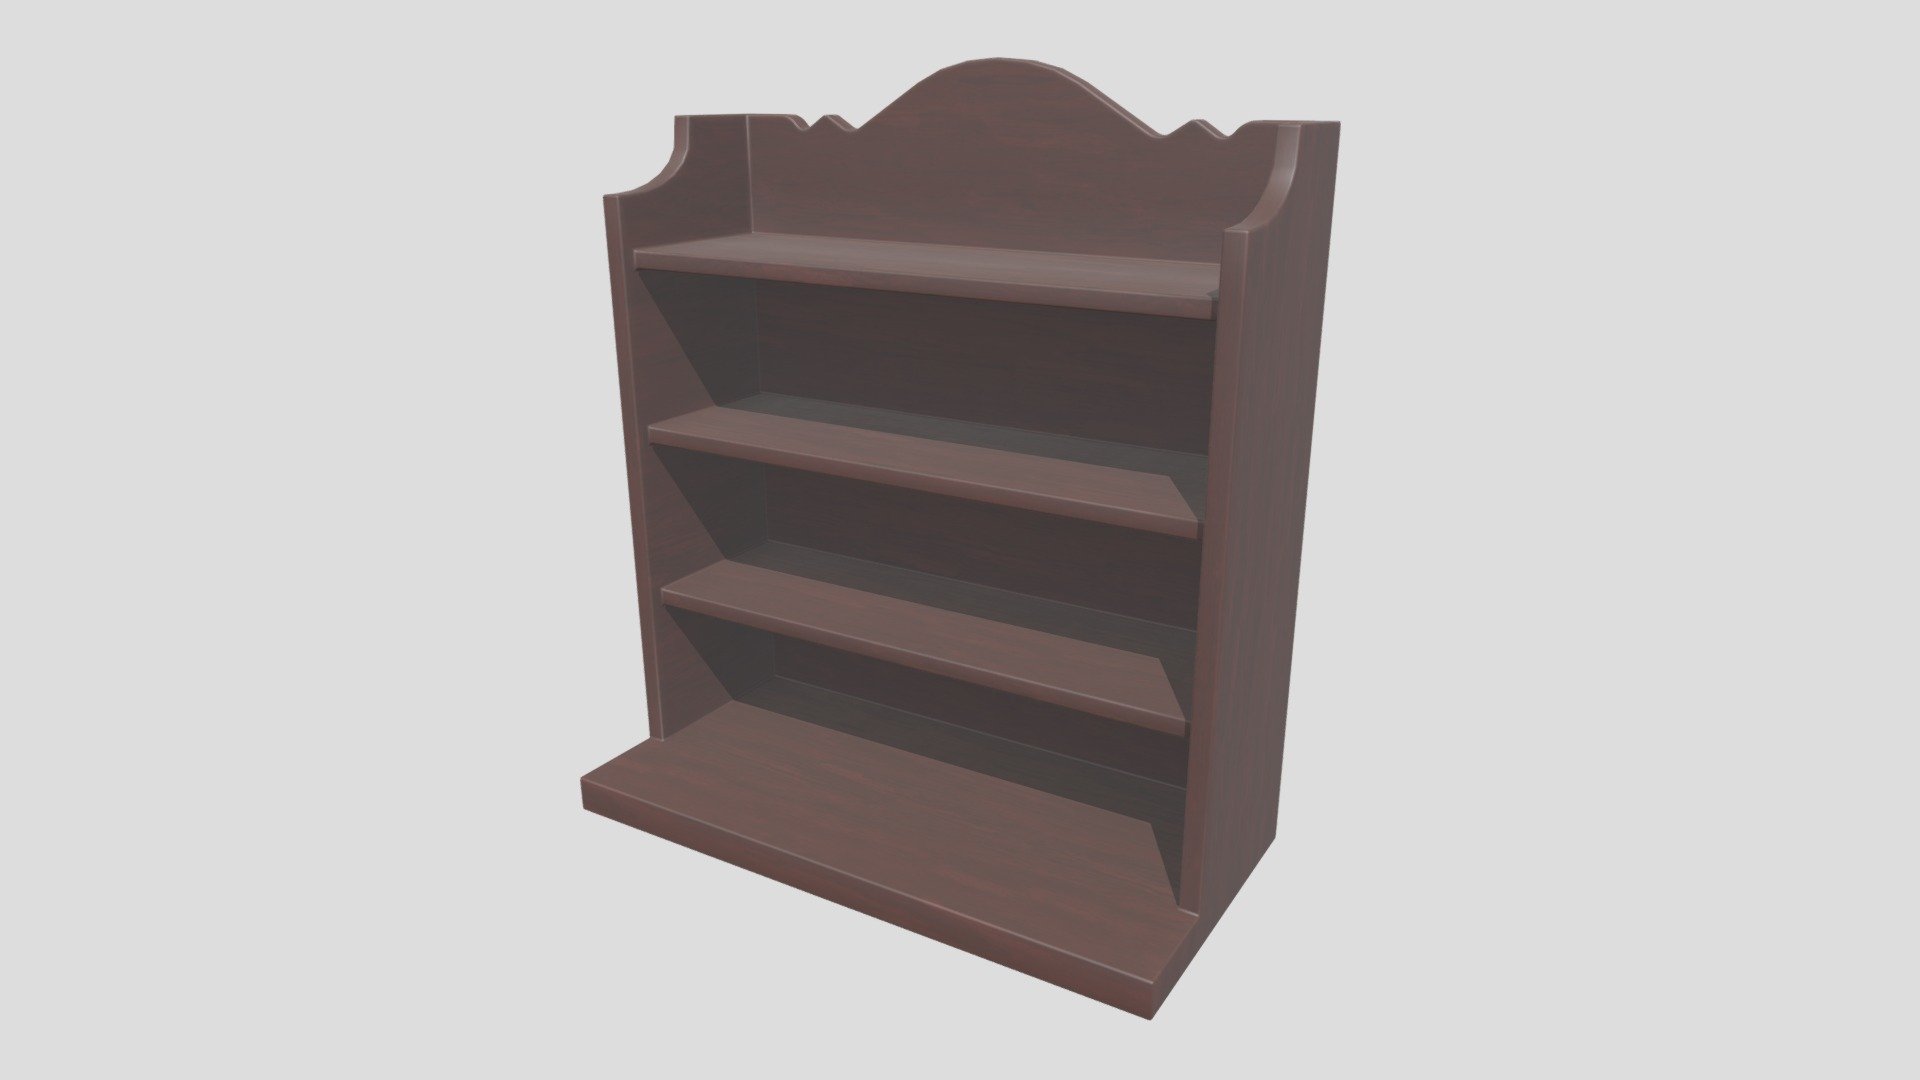 Church bookcase that was created using Blender. Included is one bookcase that is made for church scenes to store church books on but is not limited to that. It can be used for any type of scene you feel it would go good with.

Features:


Model uses the metalness workflow and PBR textures in PNG format
Includes 1 church bookcase model
The model has been manually unwrapped to match its PBR textures
Native Blend file is included with pre-applied textures
Blend file has objects and cameras grouped accordingly and easy to follow
Model has been exported in 3 file formats (FBX, OBJ, DAE/Collada)
All files have been zipped into one archive with an easy to follow hierarchy

Included Textures:


AO, Diffuse, Roughness, Gloss, Normal
UVLayout

The source file that is uploaded is for demonstration use and is uploaded in FBX format. In the additional file you will find all model exports and the textures that go along with them 3d model